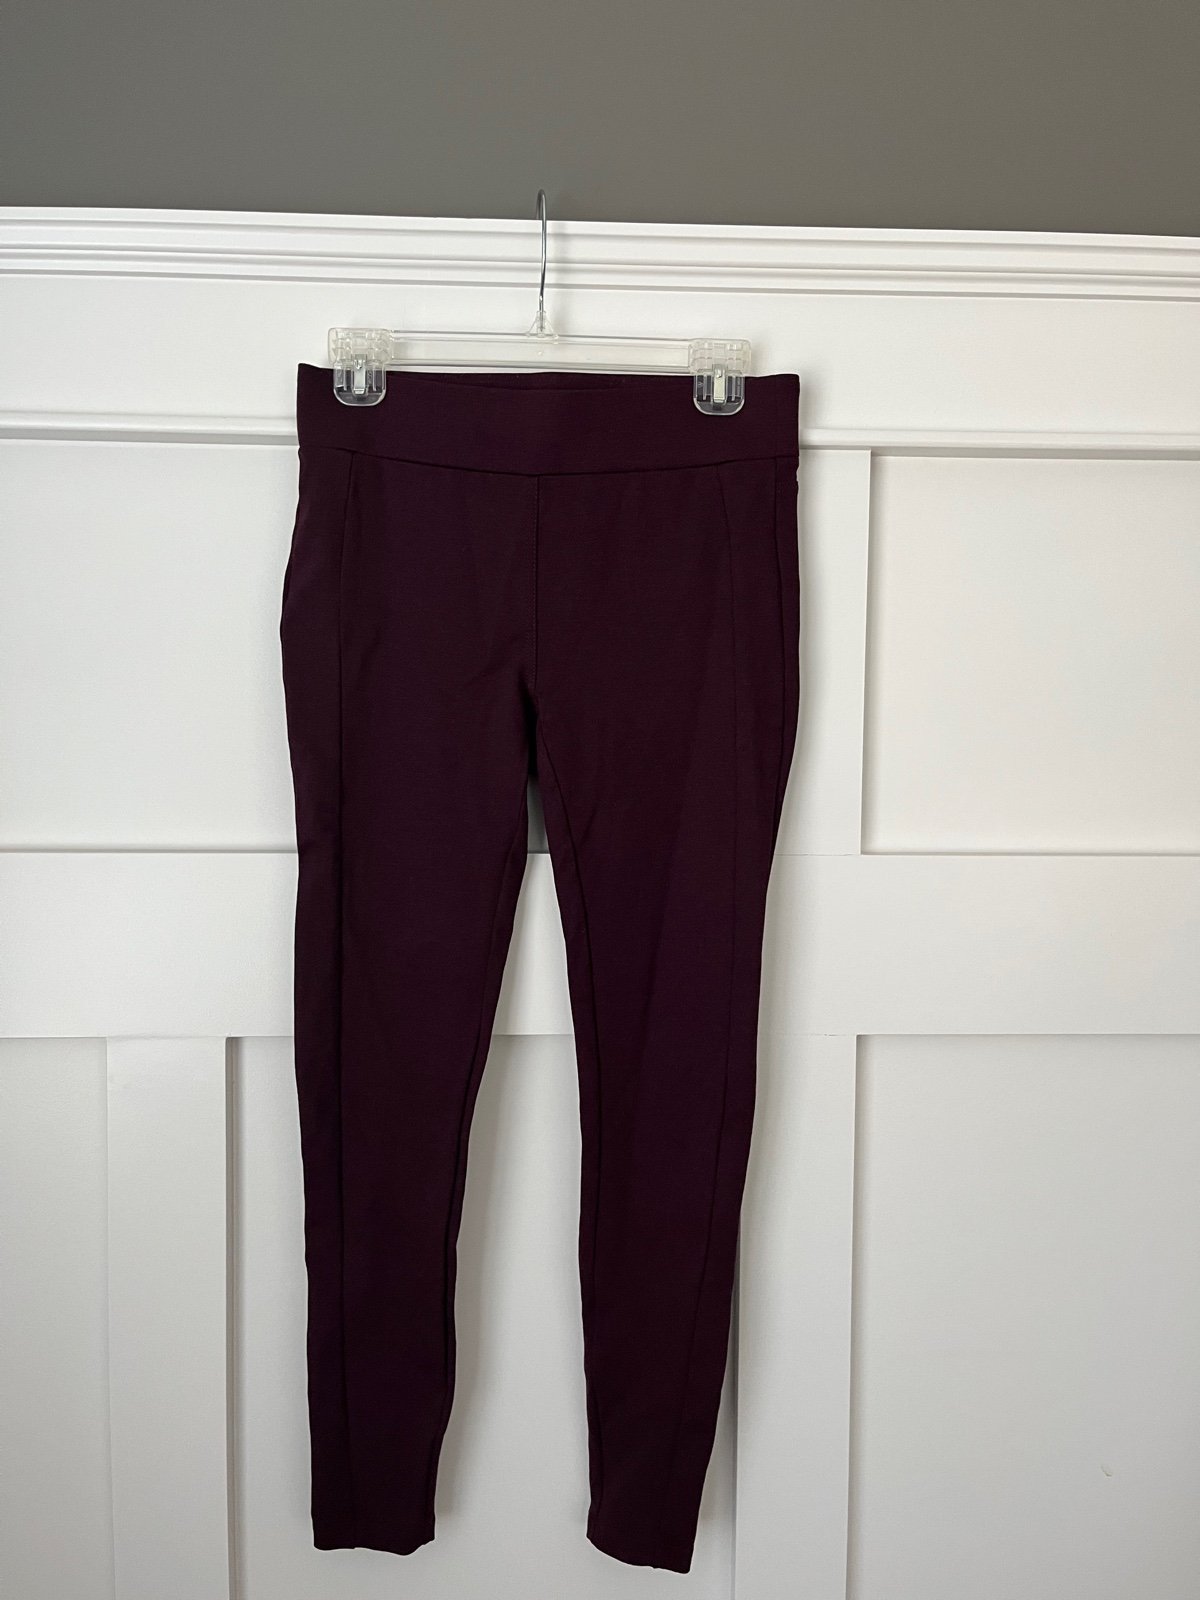 save up to 70% LOFT ponte pants size small n1GAfzbtZ Co